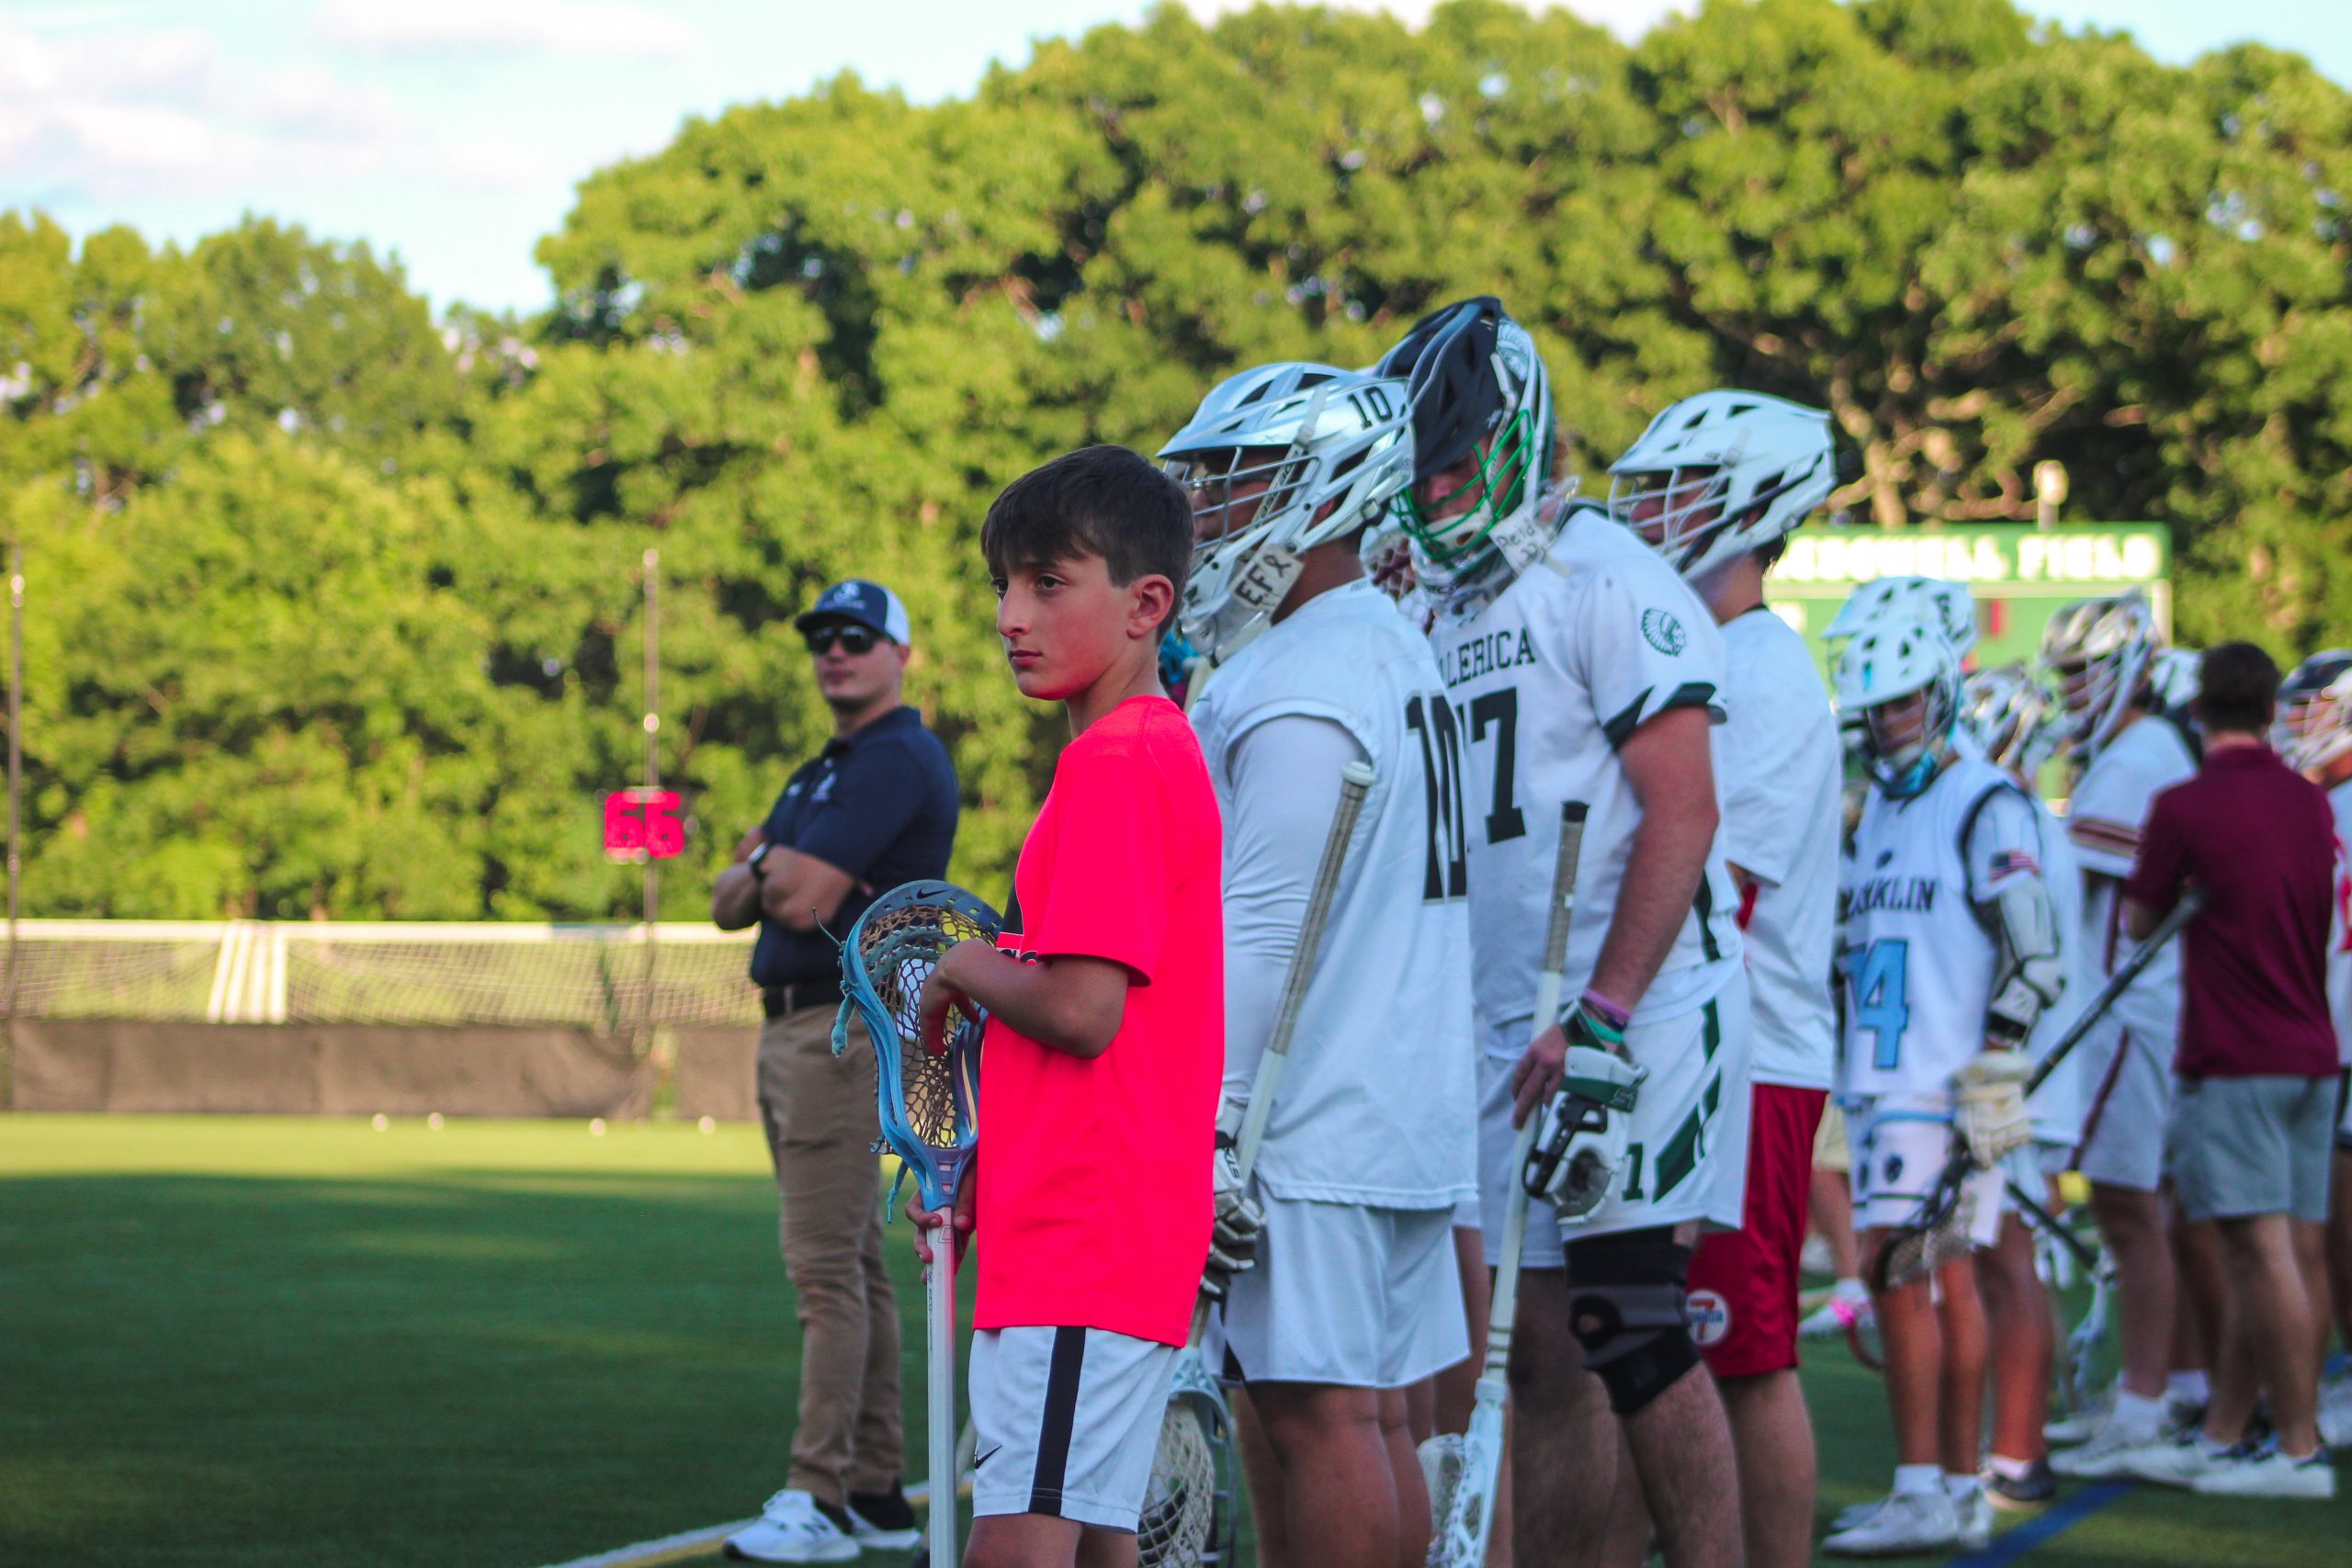 BOYS LACROSSE PLAYOFFS: Duxbury on Cloud Nine after another